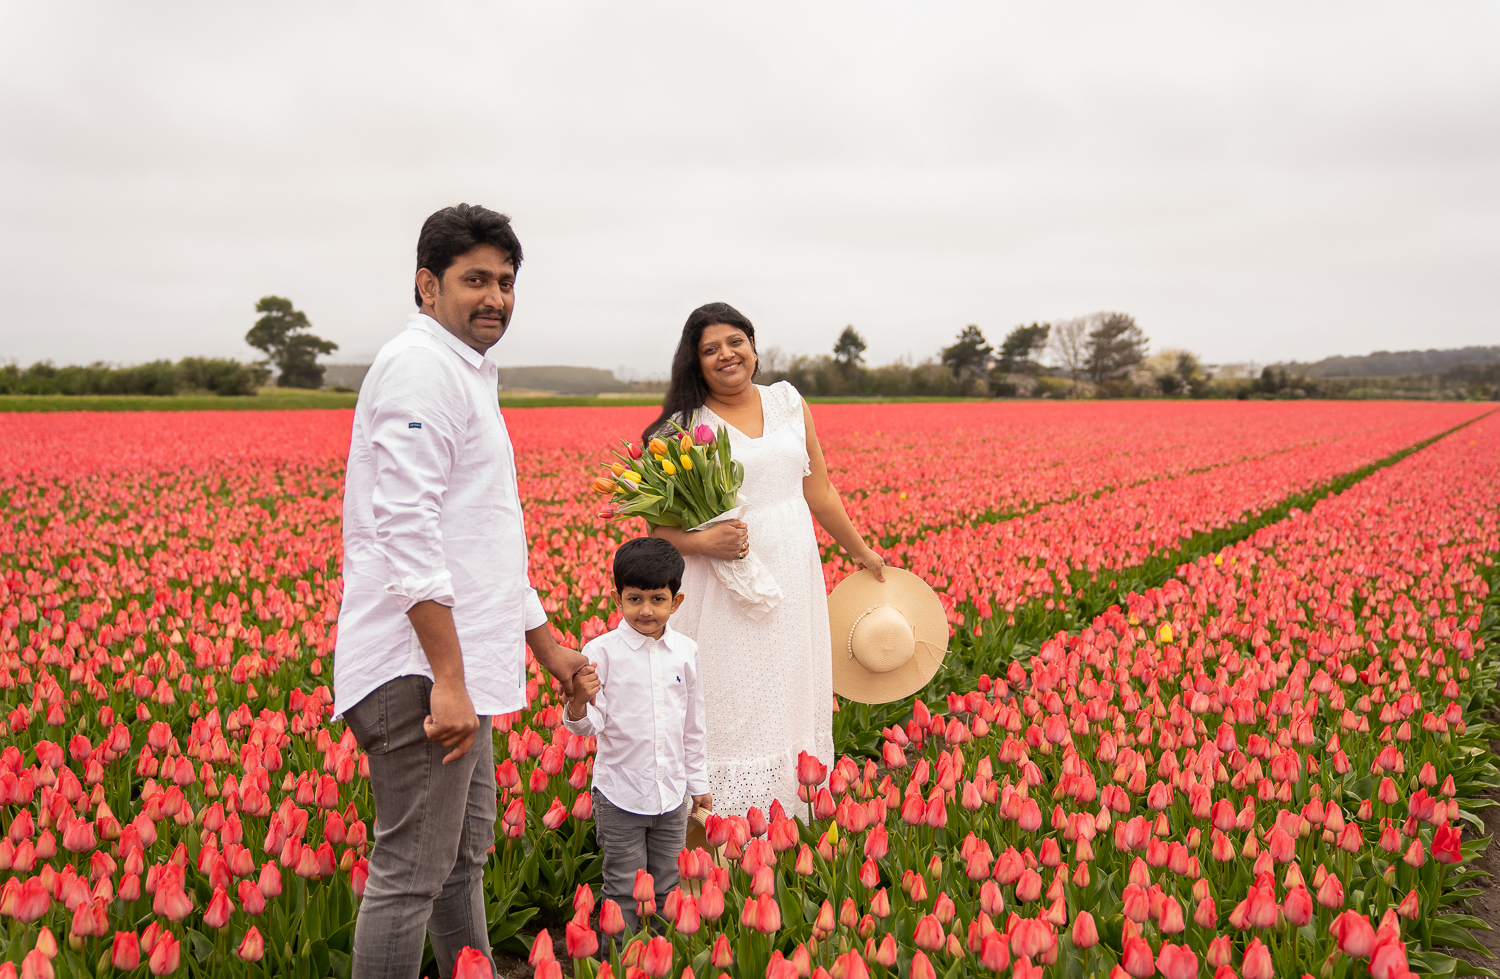 An Indian family of 3 smiling surrounded by pink tulip fields.